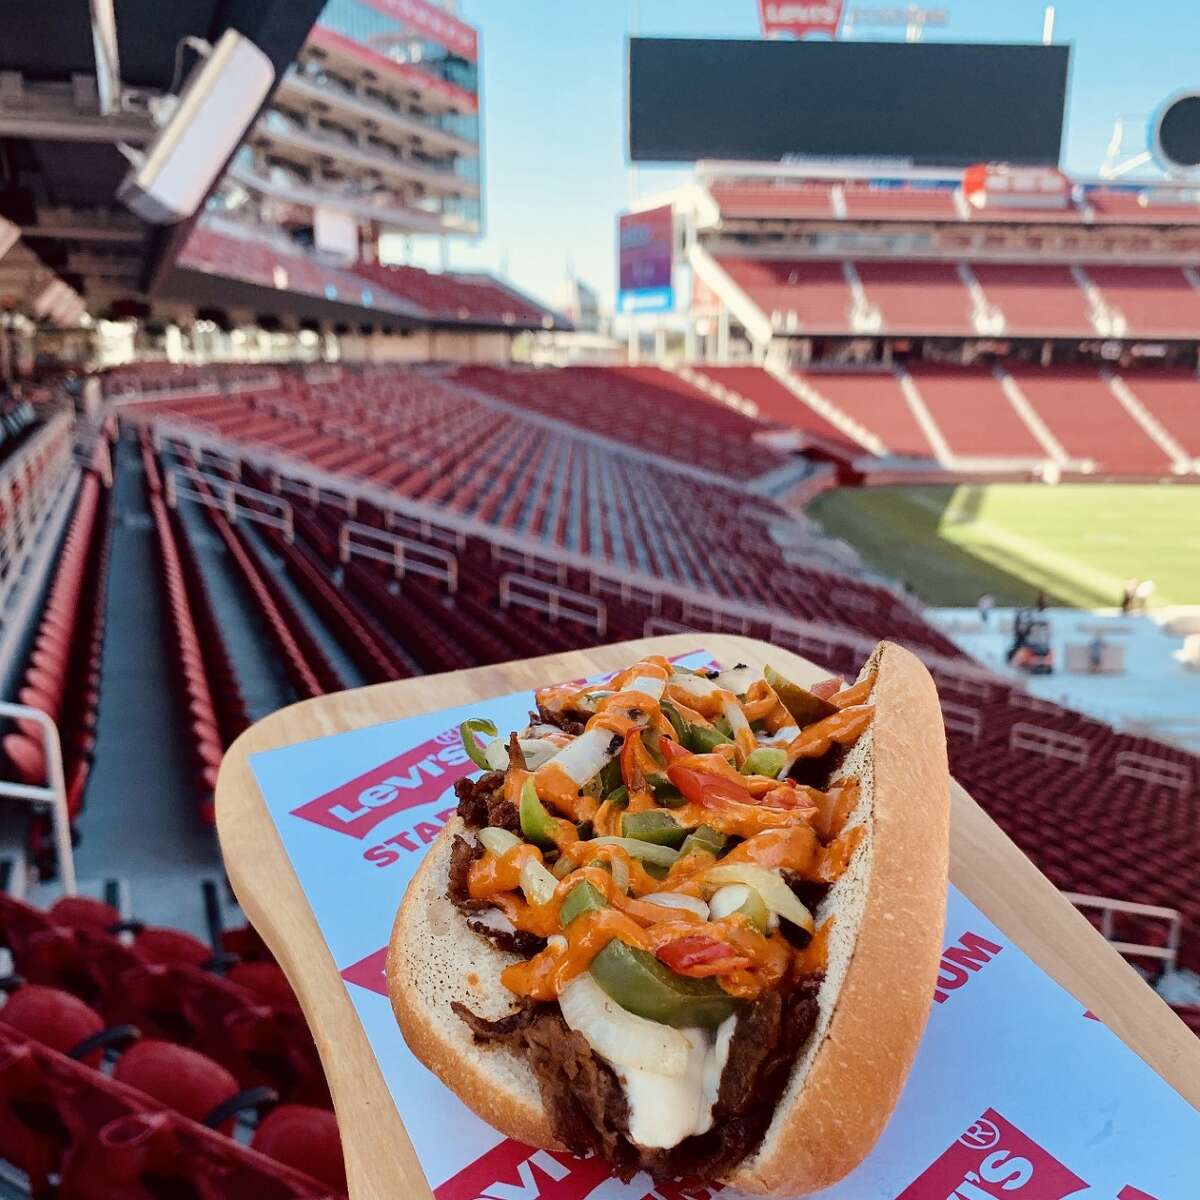 Here's the newest food lineup at Levi Stadium